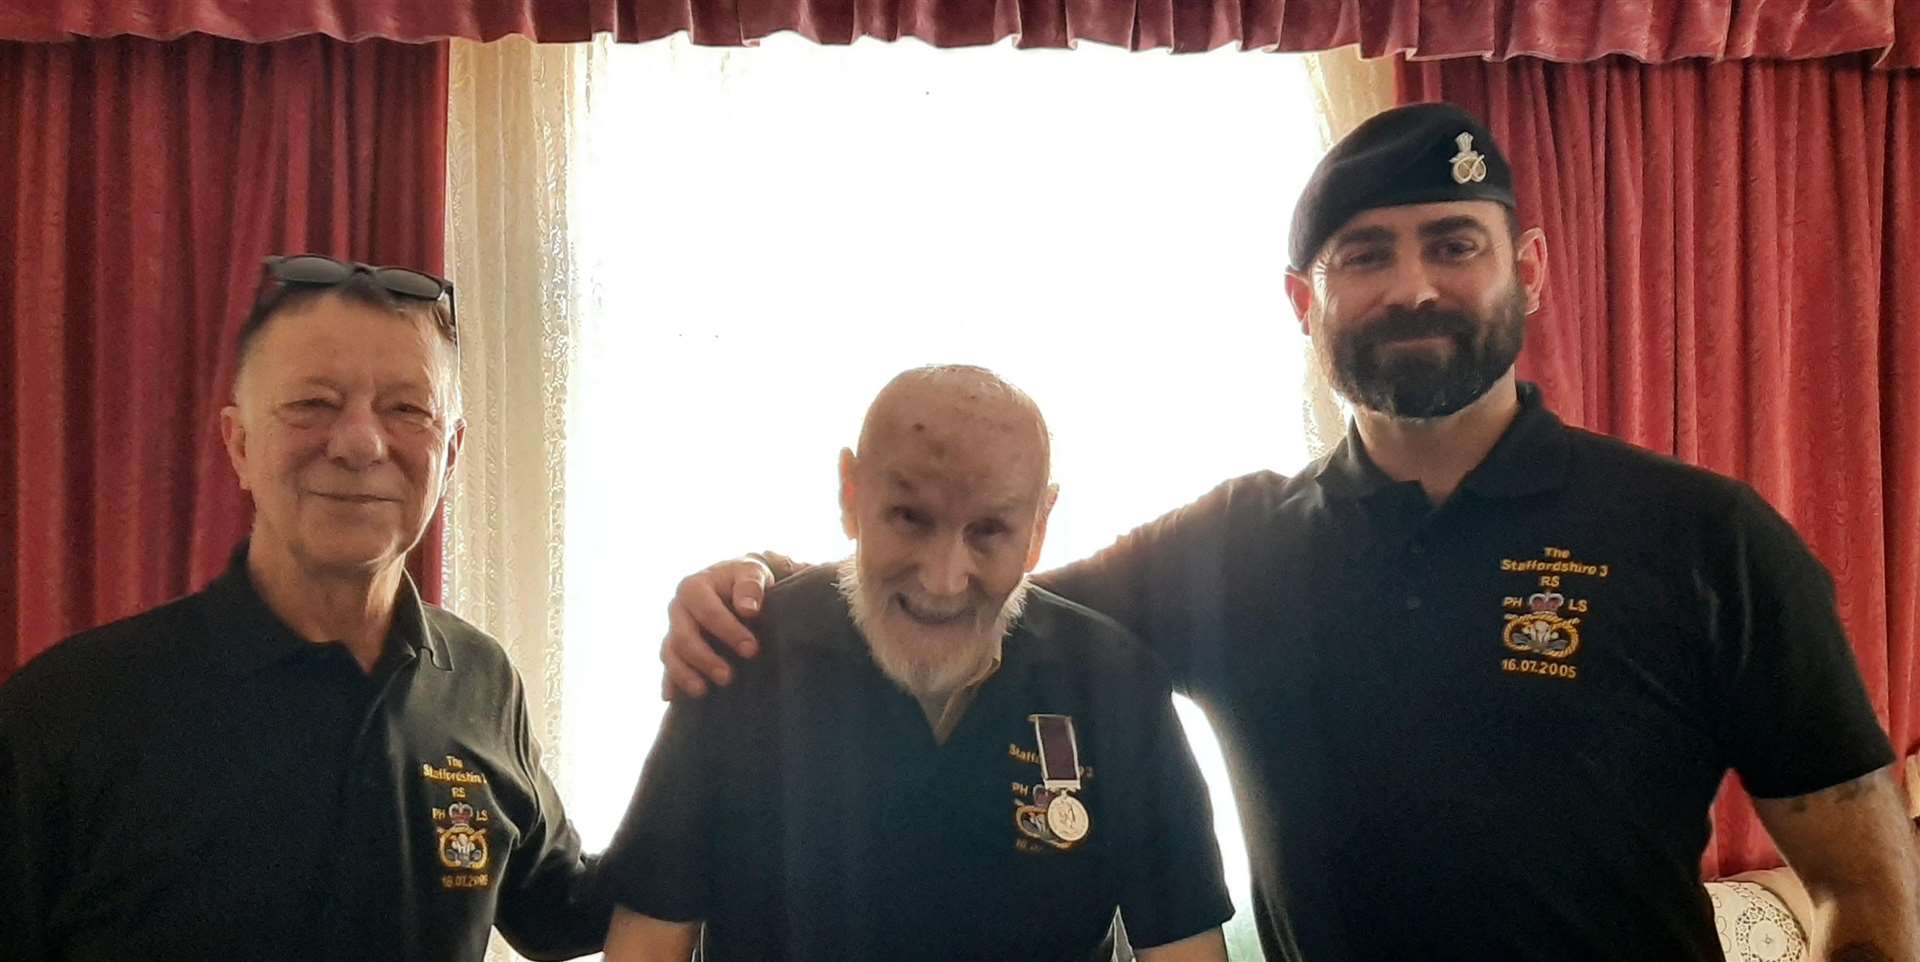 Army veteran Ronald Brown, centre, with Gordon Moore, left, and Anthony Frith, right, from the Staffordshire Regiment